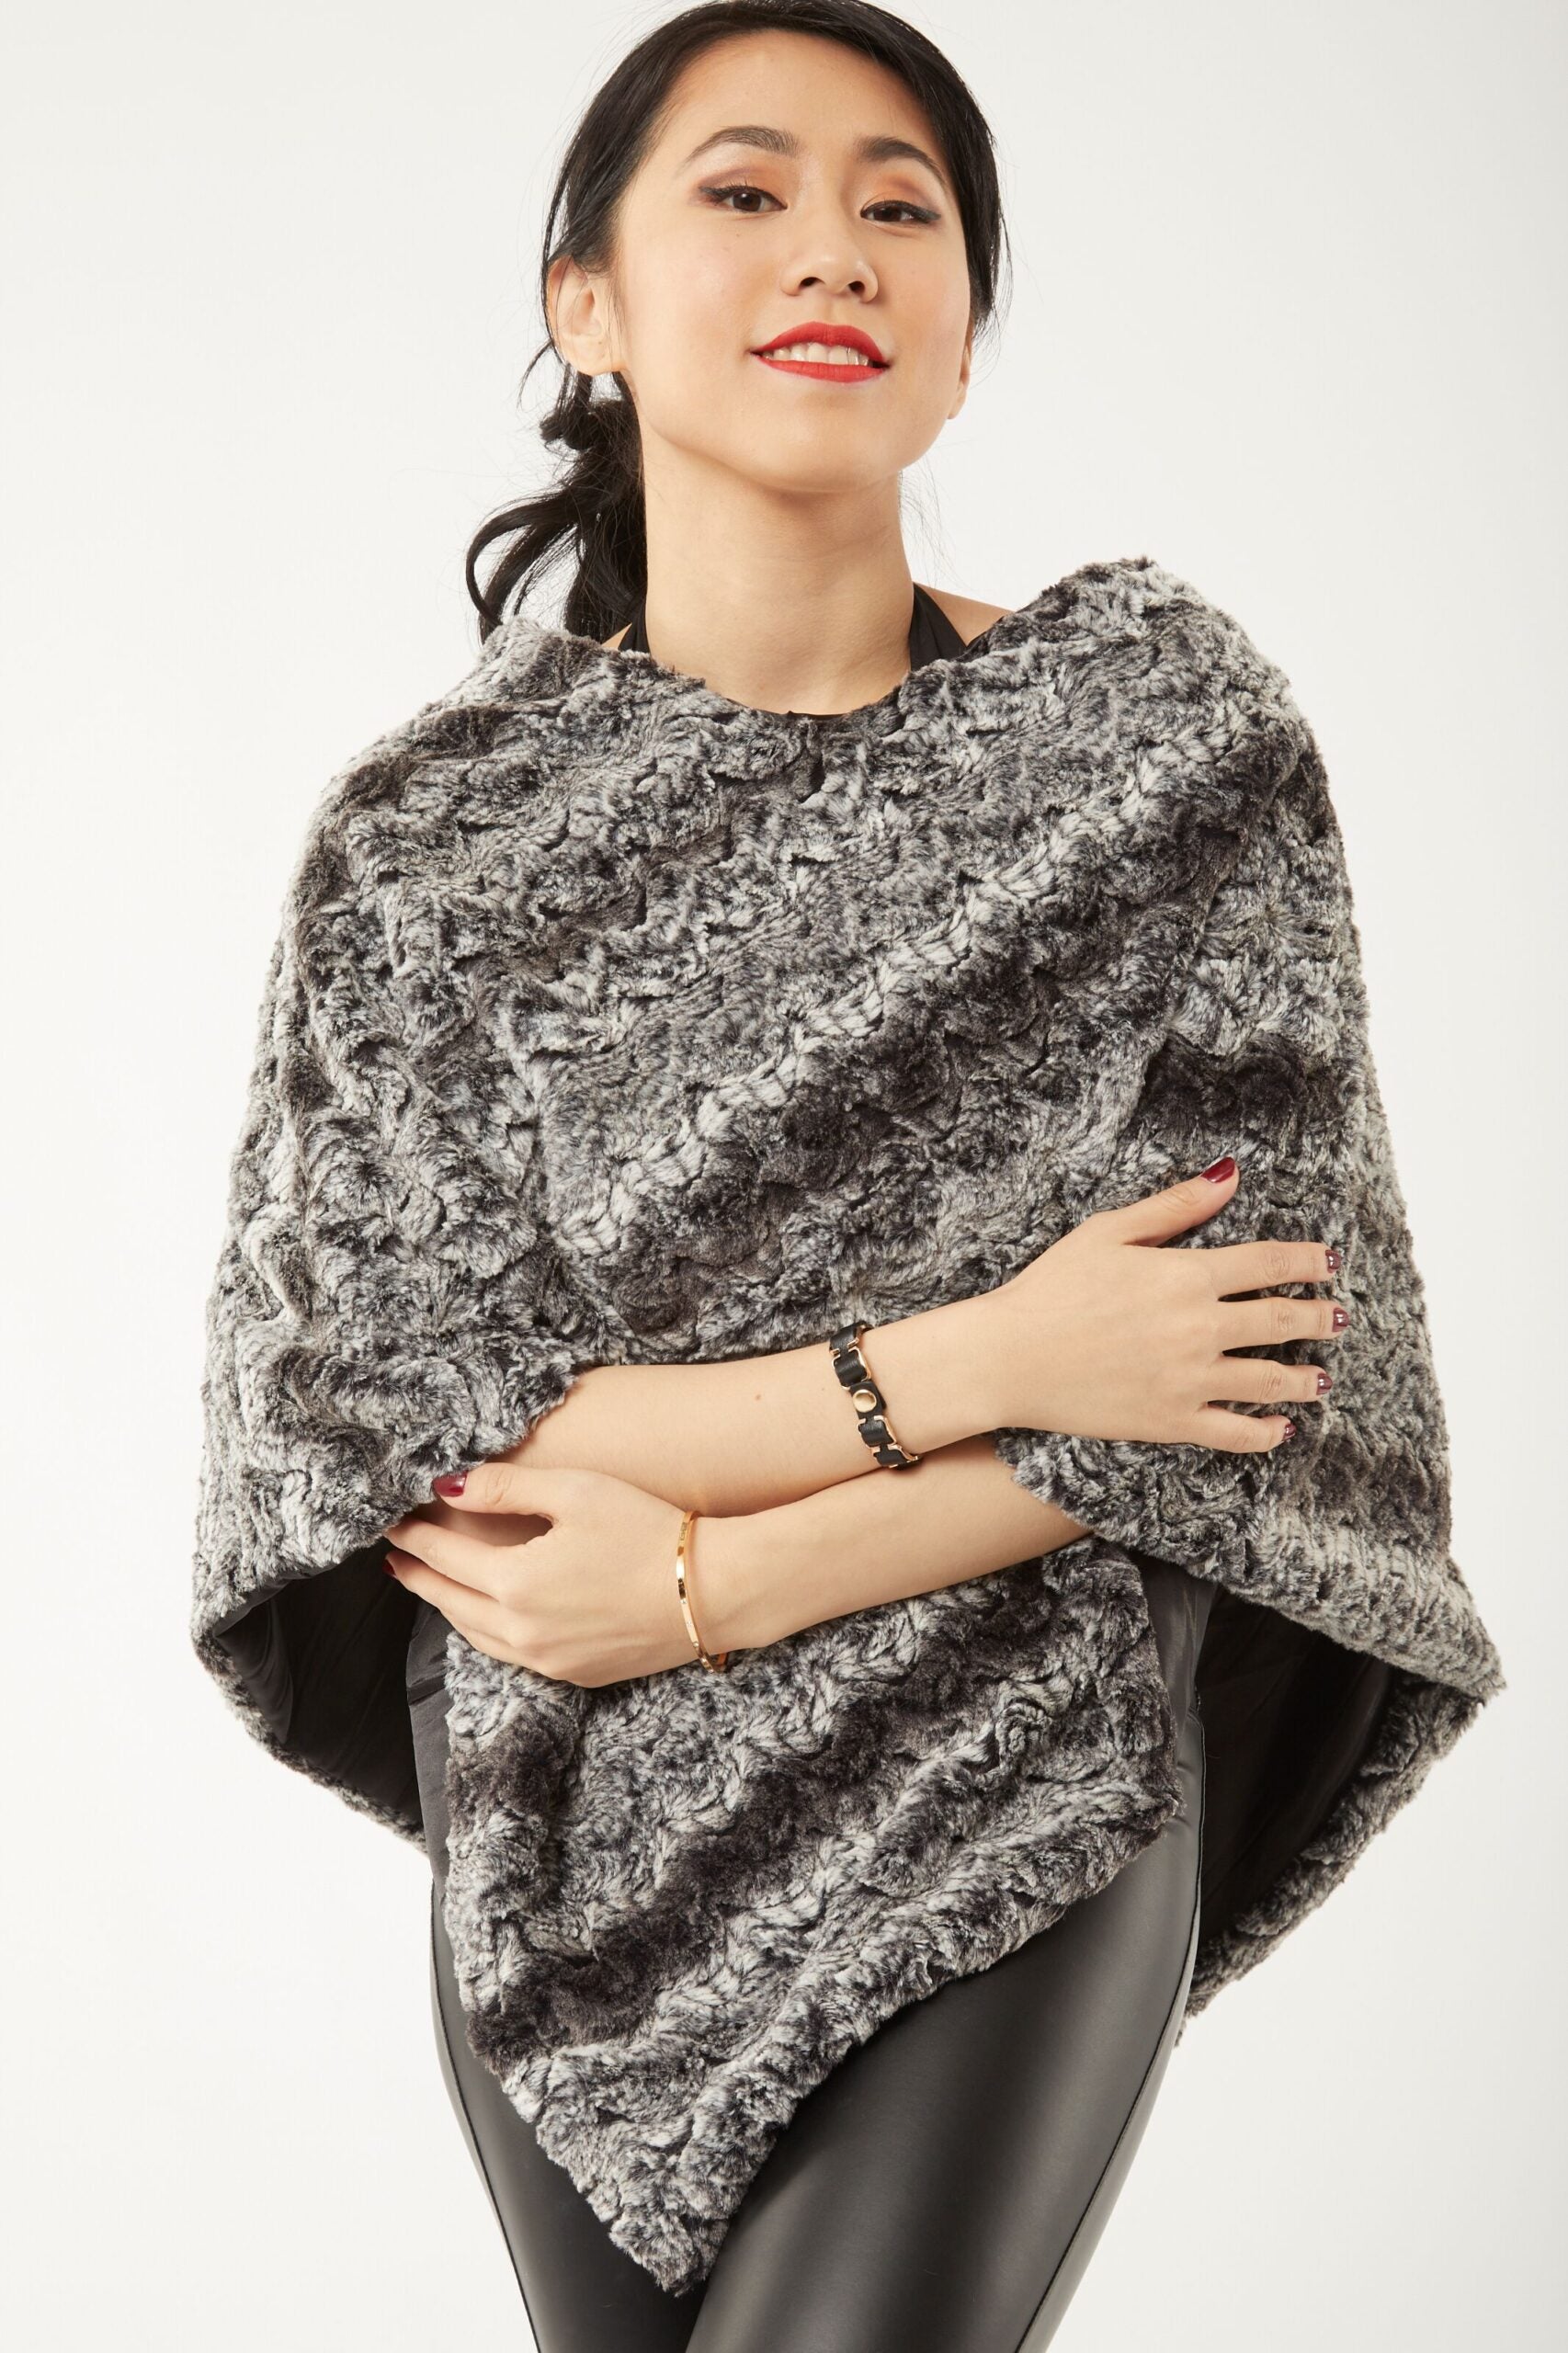 Alternate pose of woman wearing a Paloma Poncho – Chocolate and Black Color